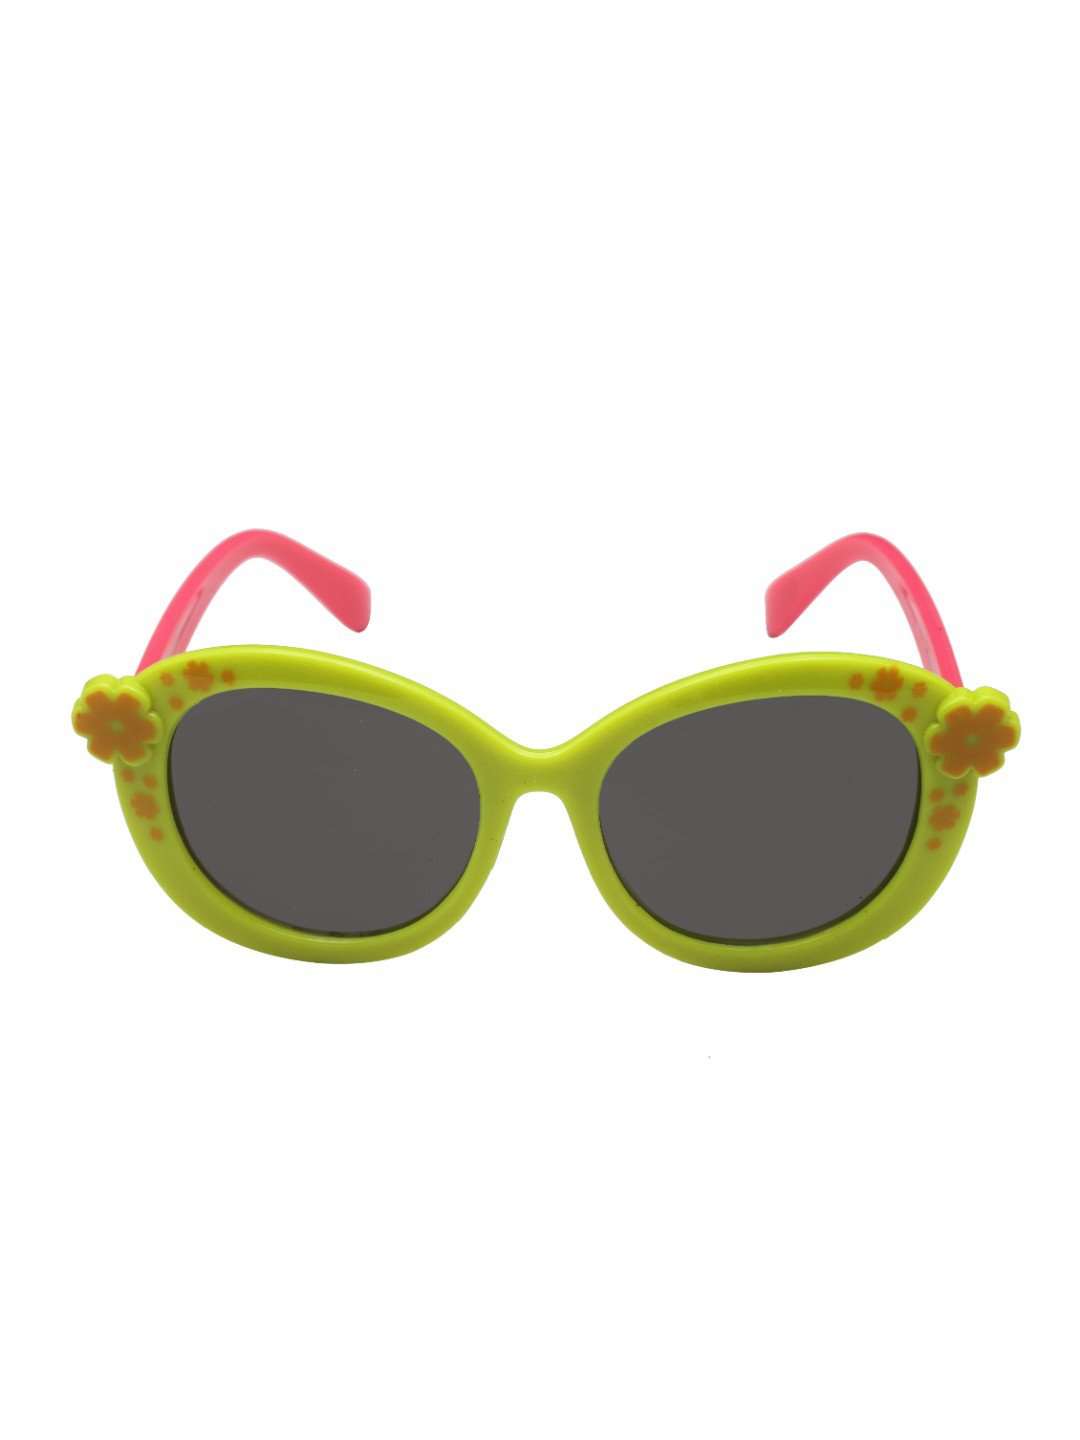 Stol'n Kids Green and Pink Flower Oval Sunglasses - SWHF